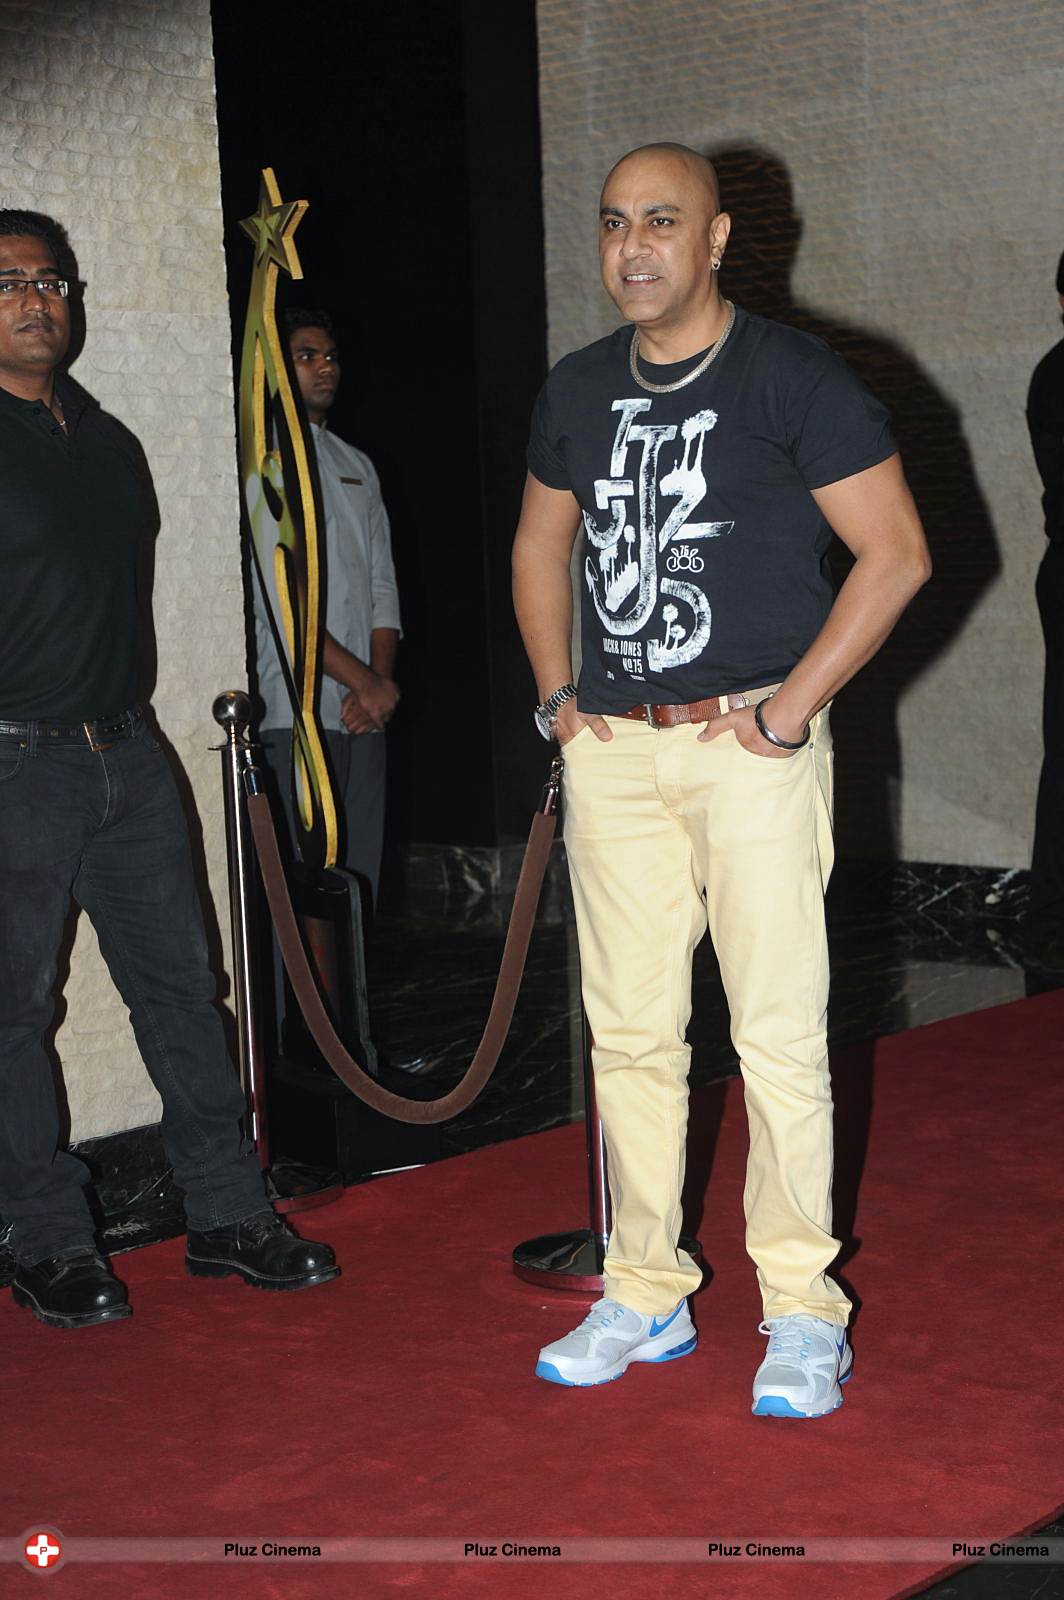 Baba Sehgal - Celebs at SIIMA Awards 2013 Pre Party Event Photos | Picture 563661